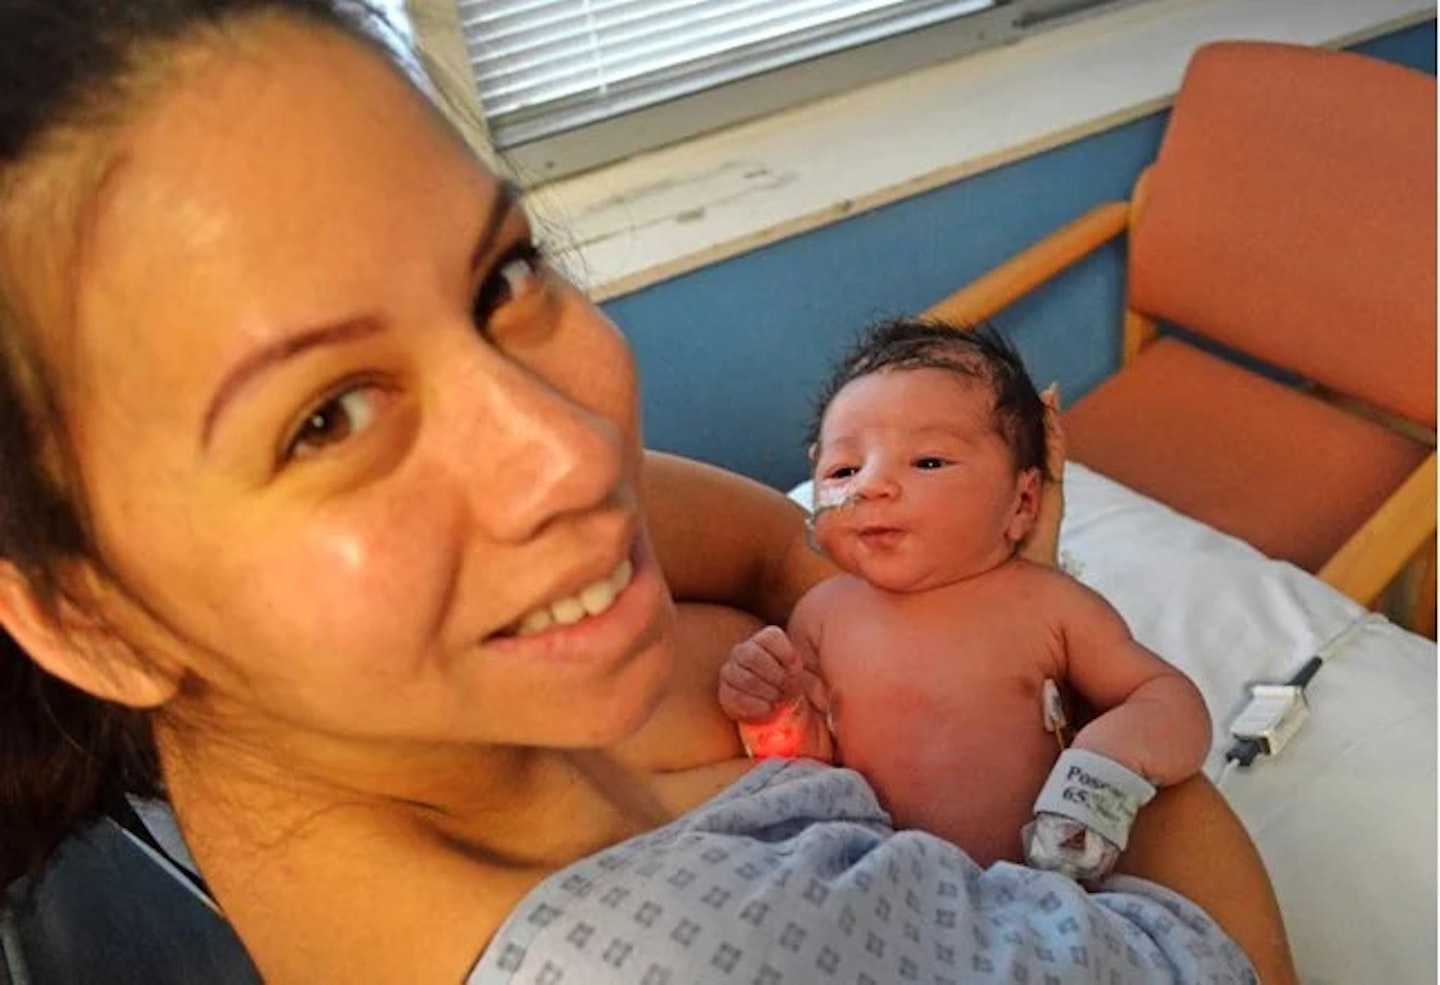 ‘I was happy to have an emergency c-section’